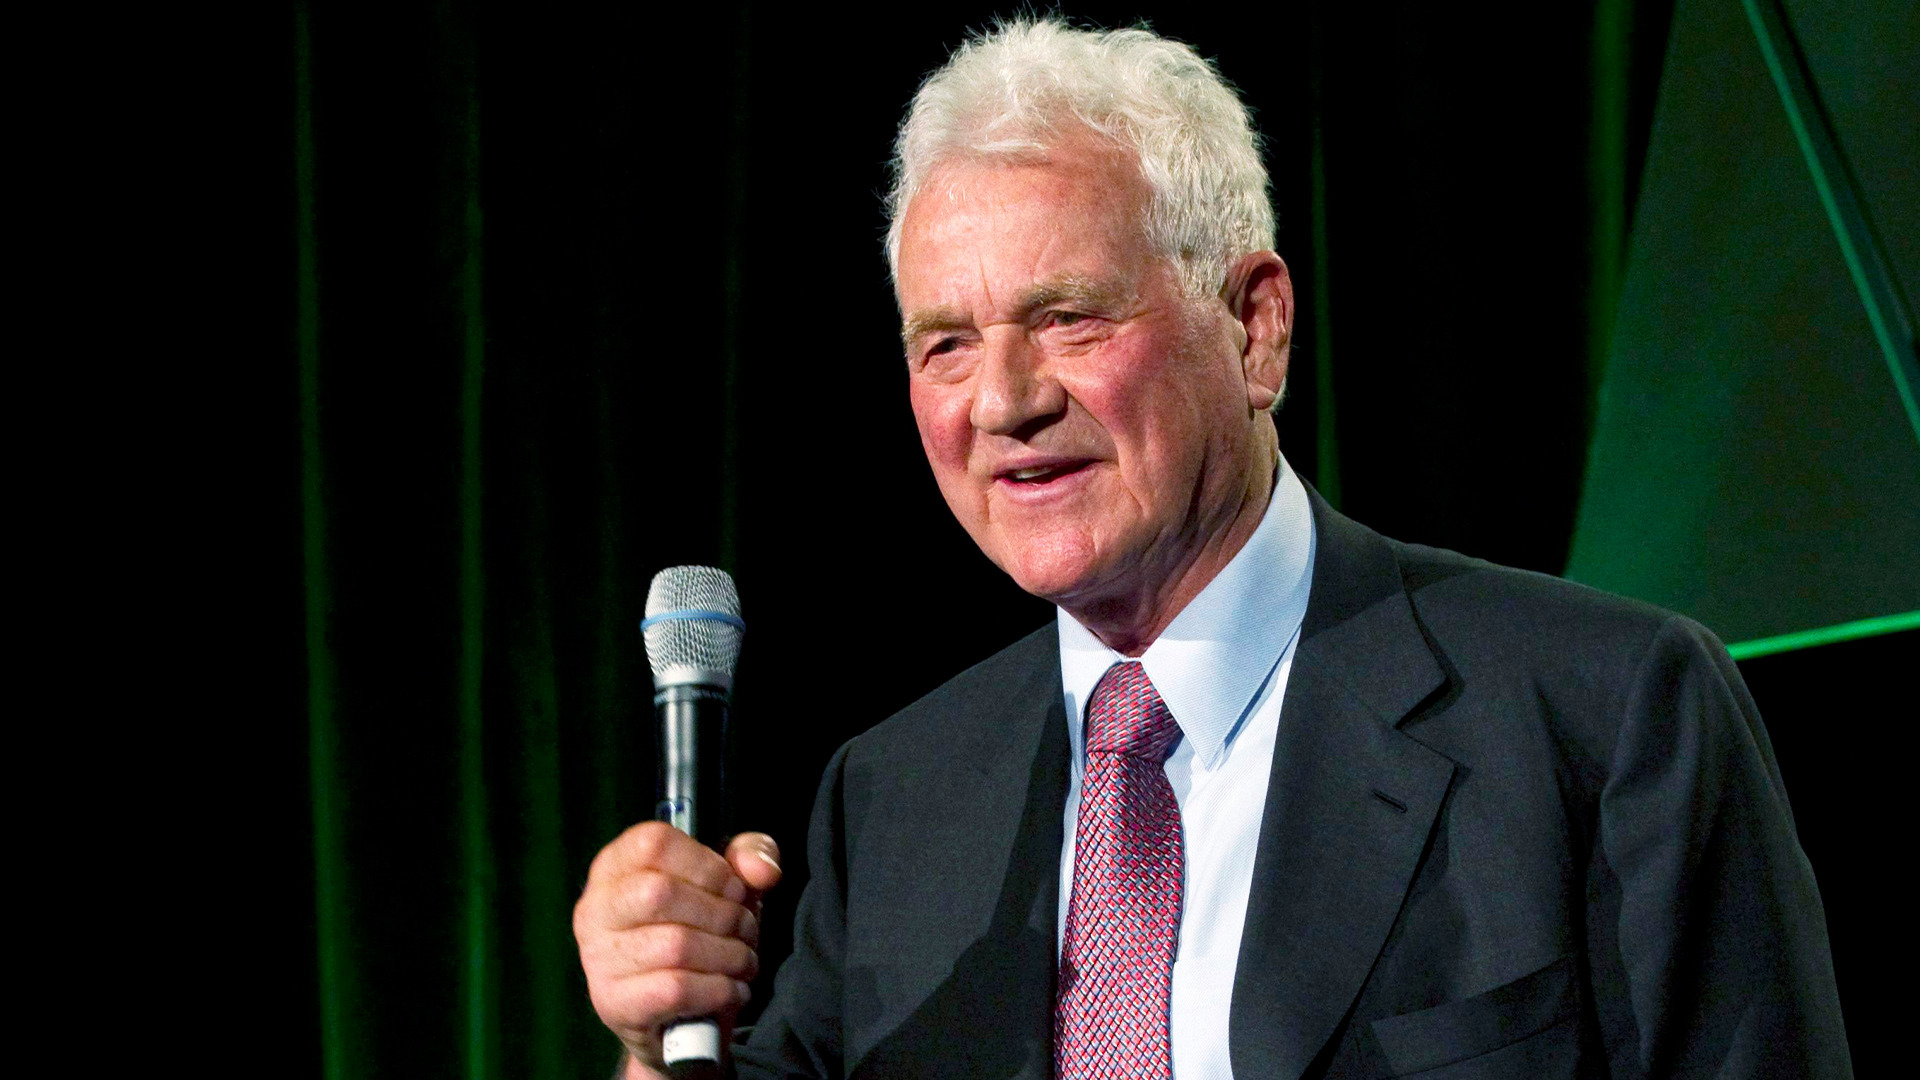 7 additional complaints lead to more charges against Frank Stronach